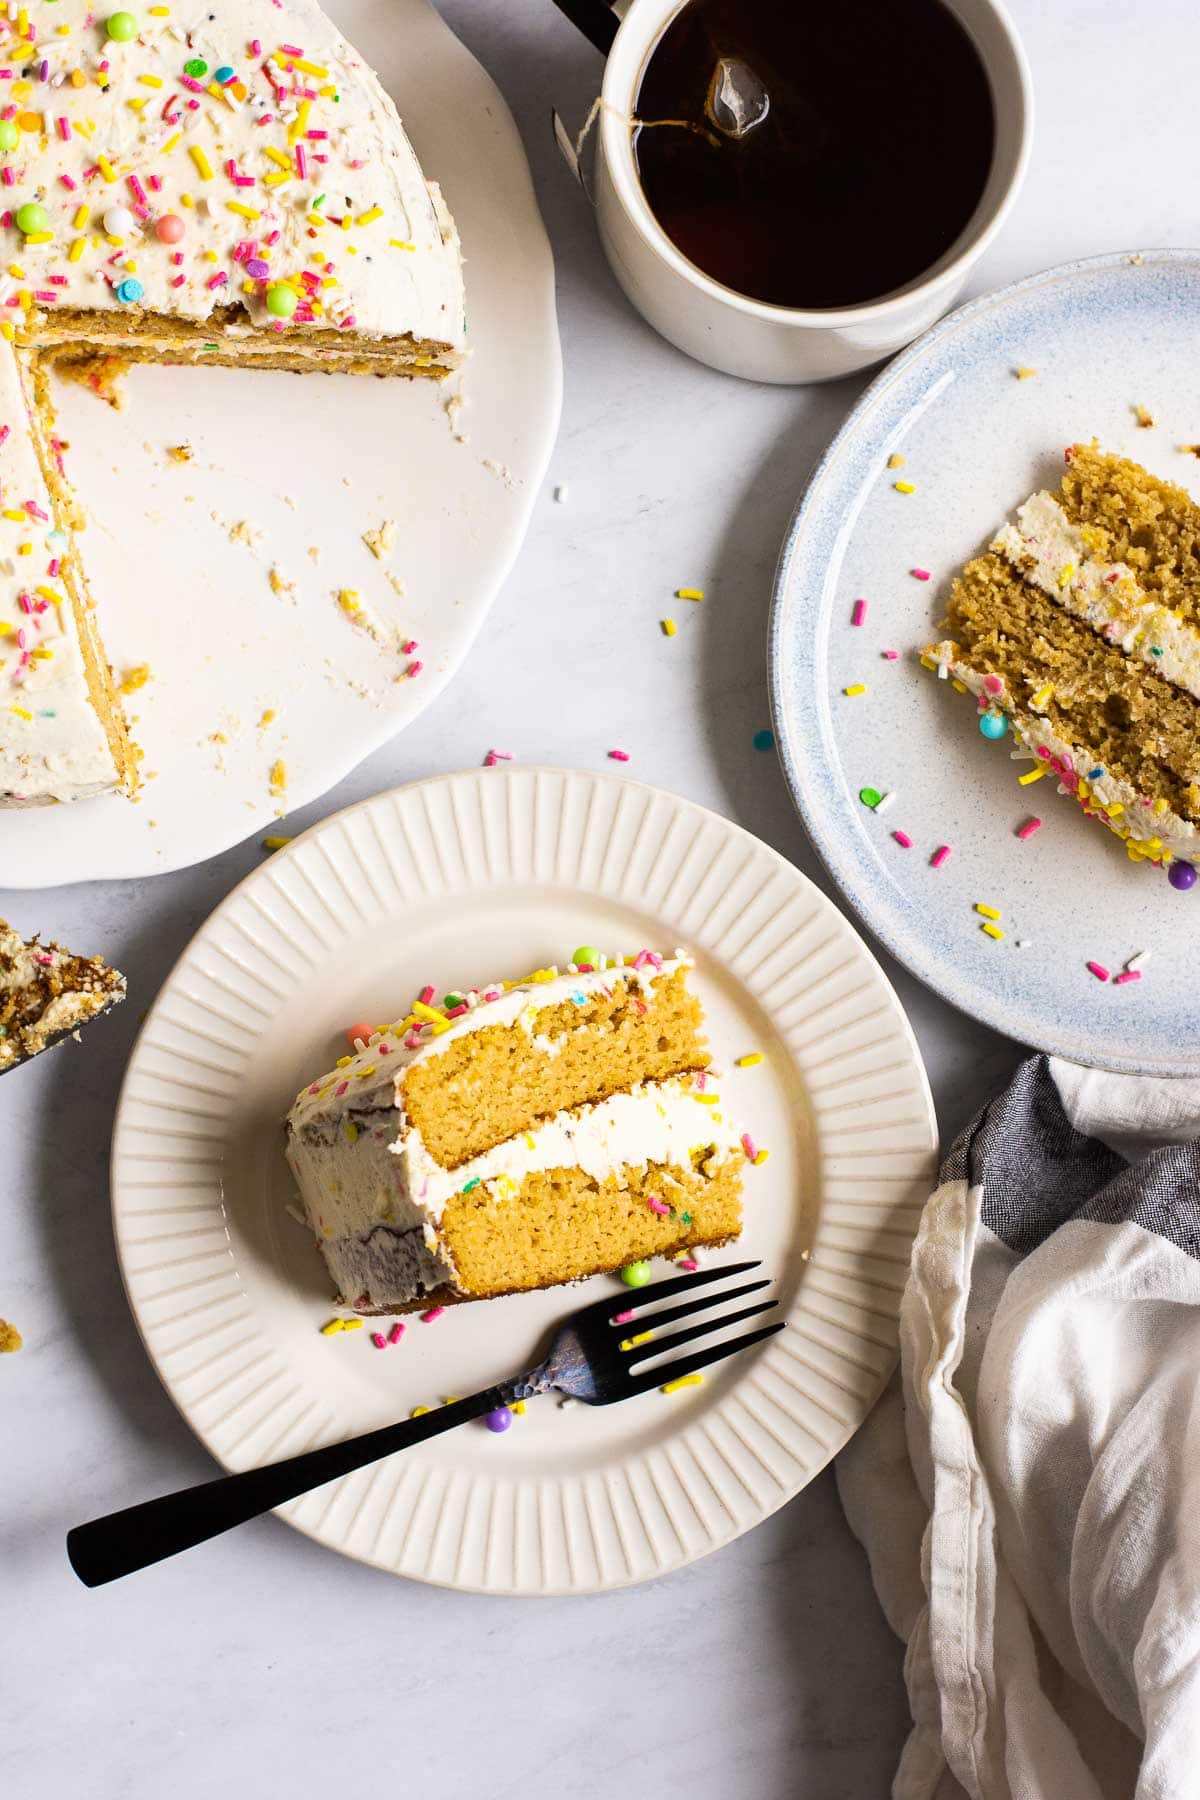 Two slices of healthy birthday cake on plates with a cup of tea and cake.